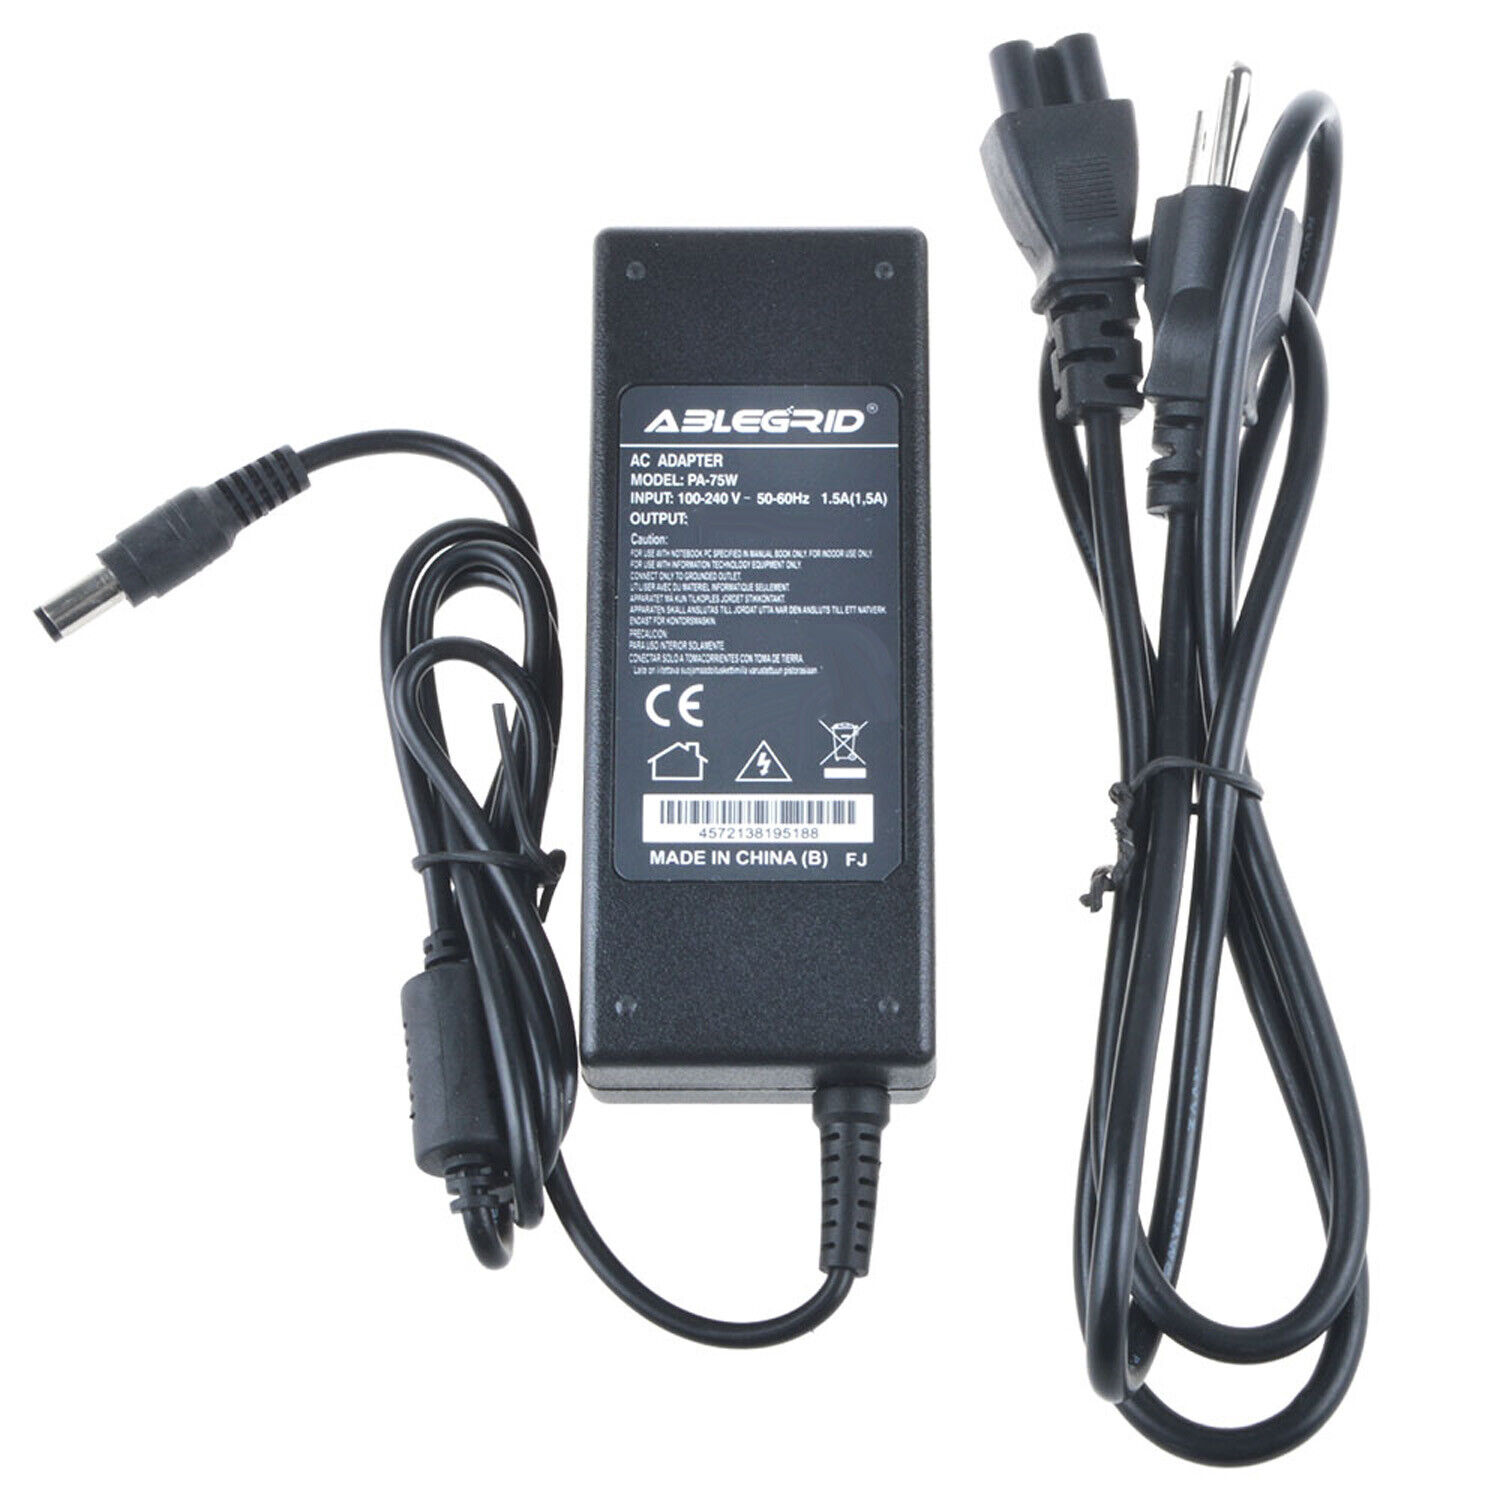 AC Adapter For Toshiba Satellite A15-S1291 A15-S1292 A15-S157 Power Cord Charger